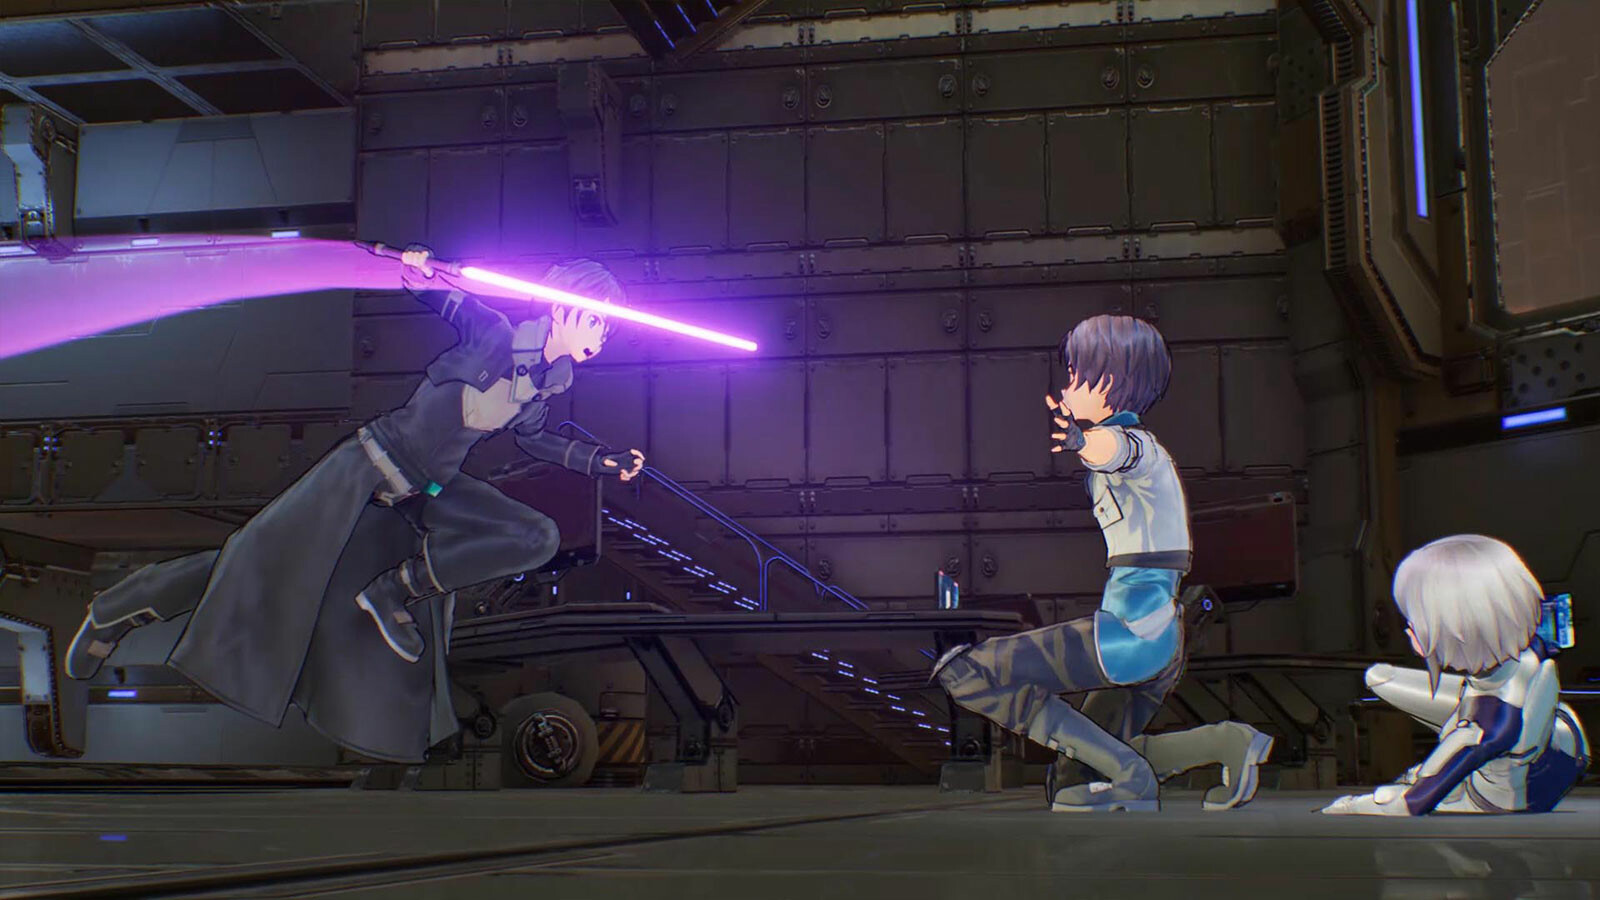 Sword Art Online Re: Hollow Fragment Releases On Steam On March 23